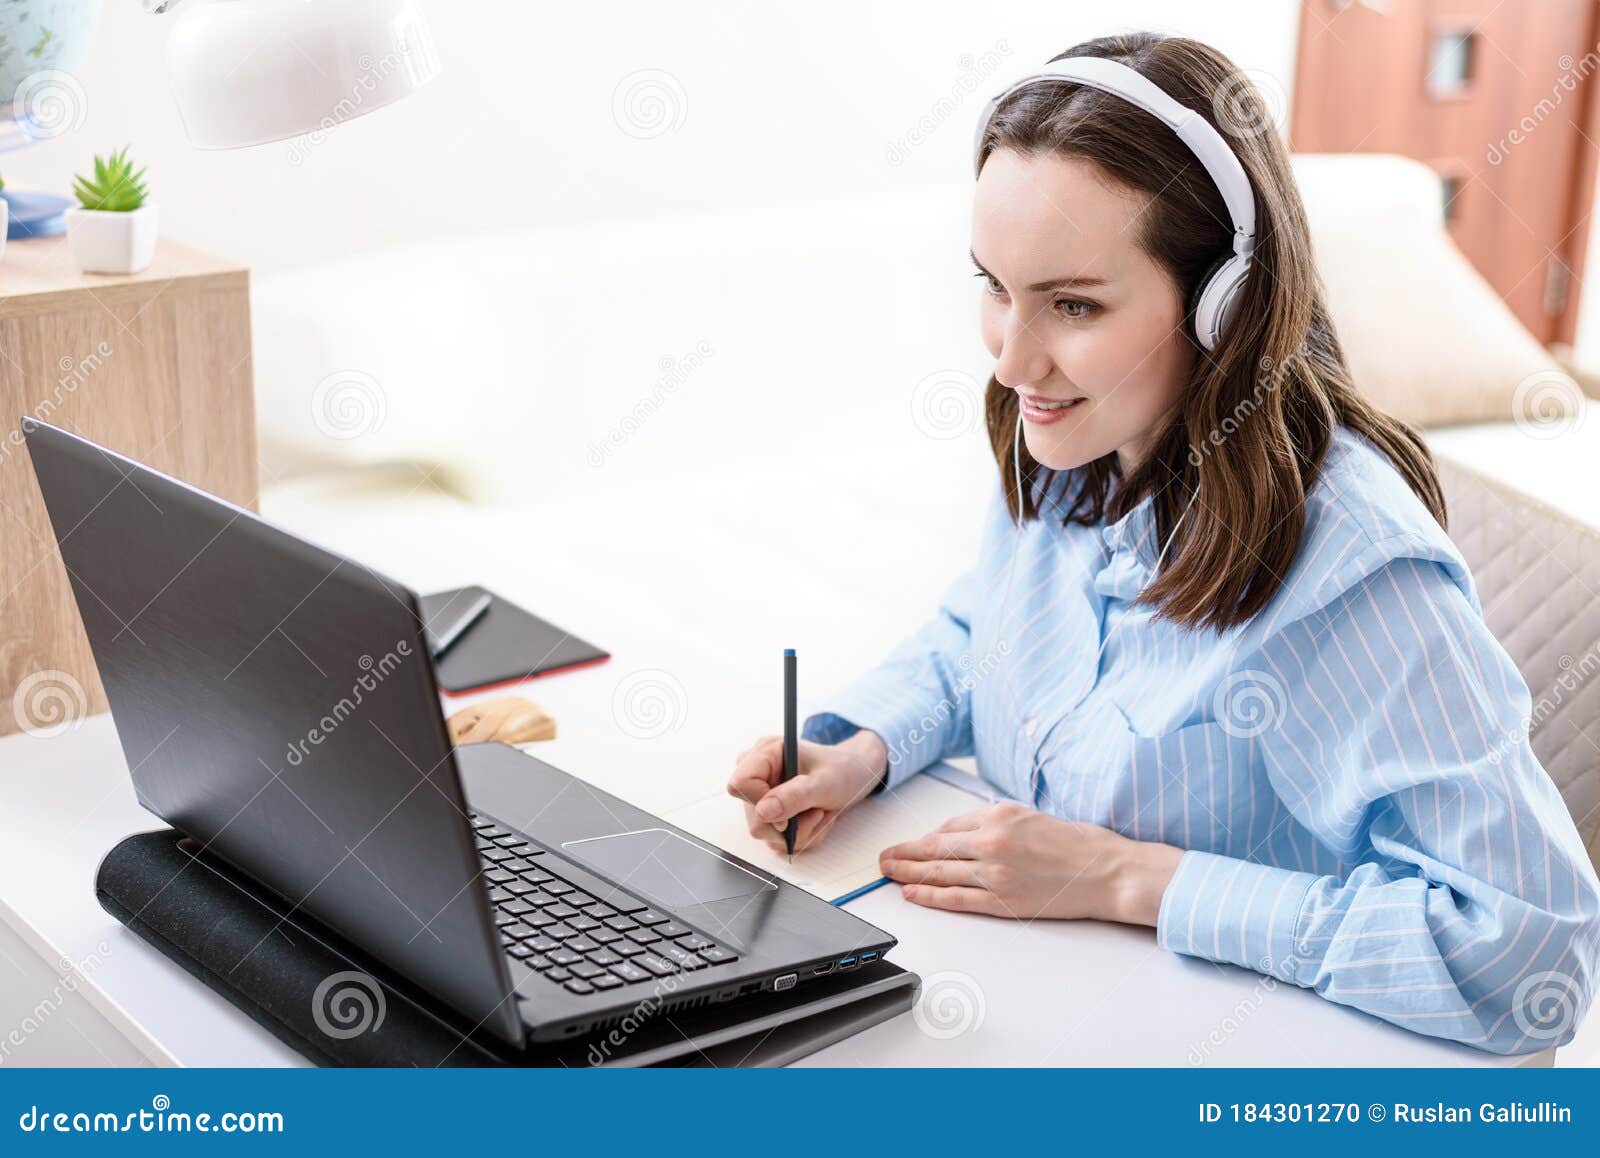 caucasian woman with headphones writes in notebook, looks at laptop screen, remote work at home, home training